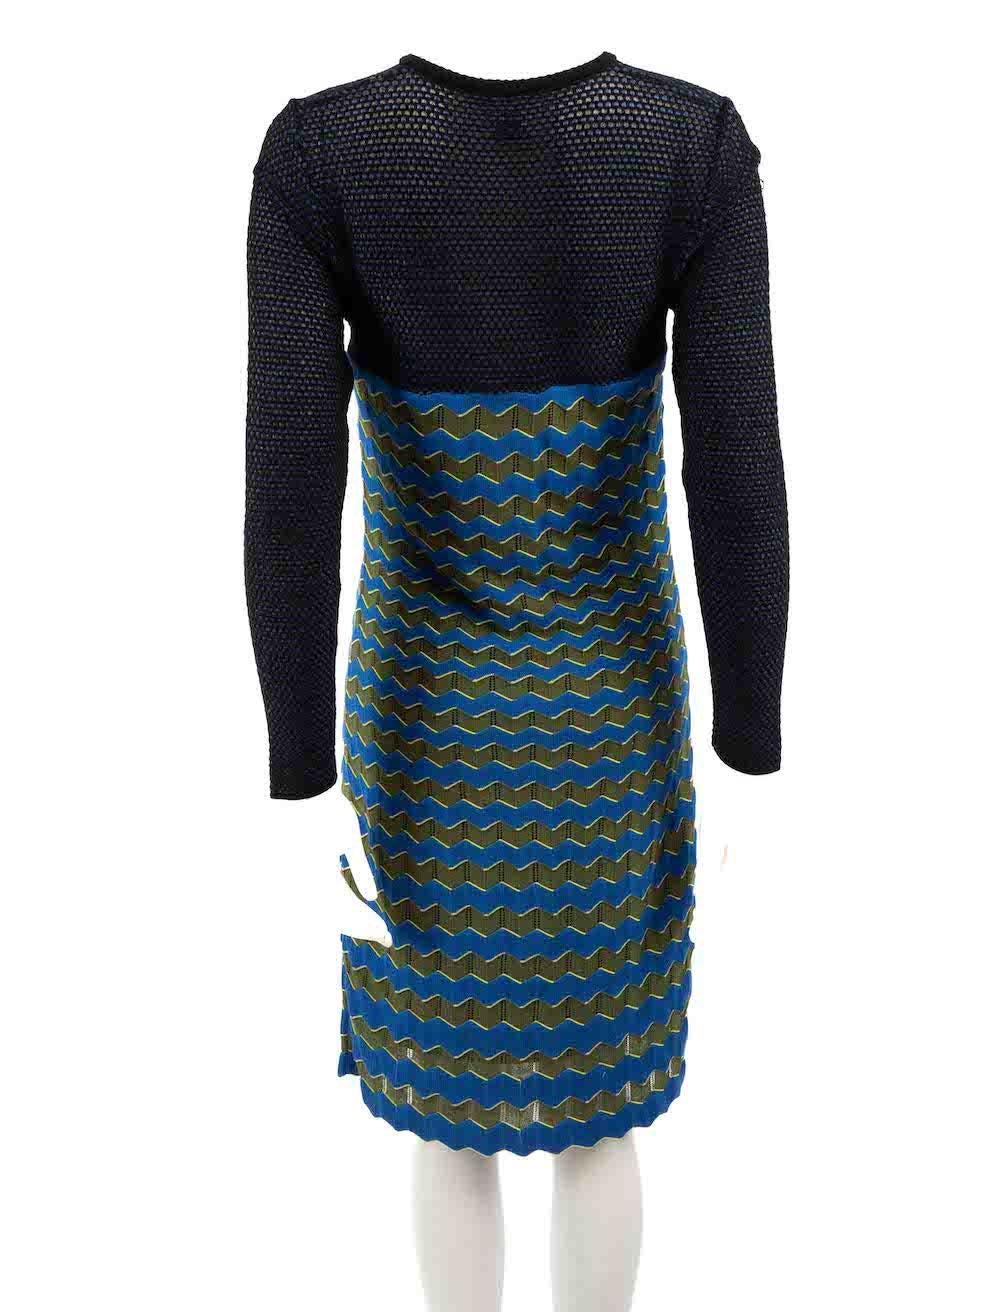 Missoni Zigzag Striped Long Sleeve Midi Dress Size L In Good Condition For Sale In London, GB